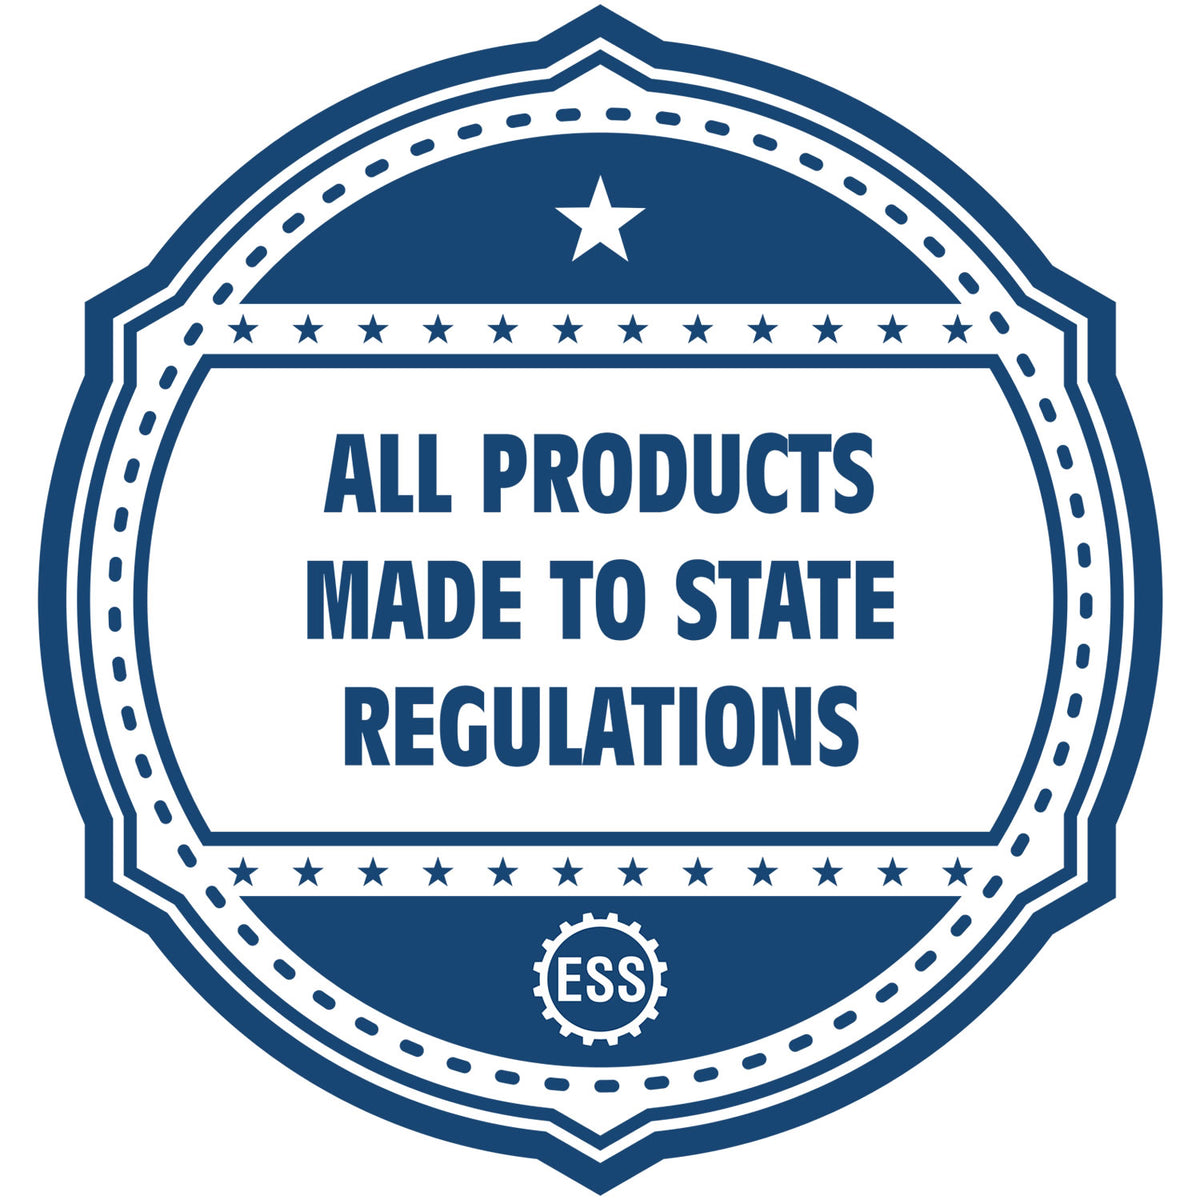 An icon or badge element for the Hawaii Landscape Architectural Seal Stamp showing that this product is made in compliance with state regulations.